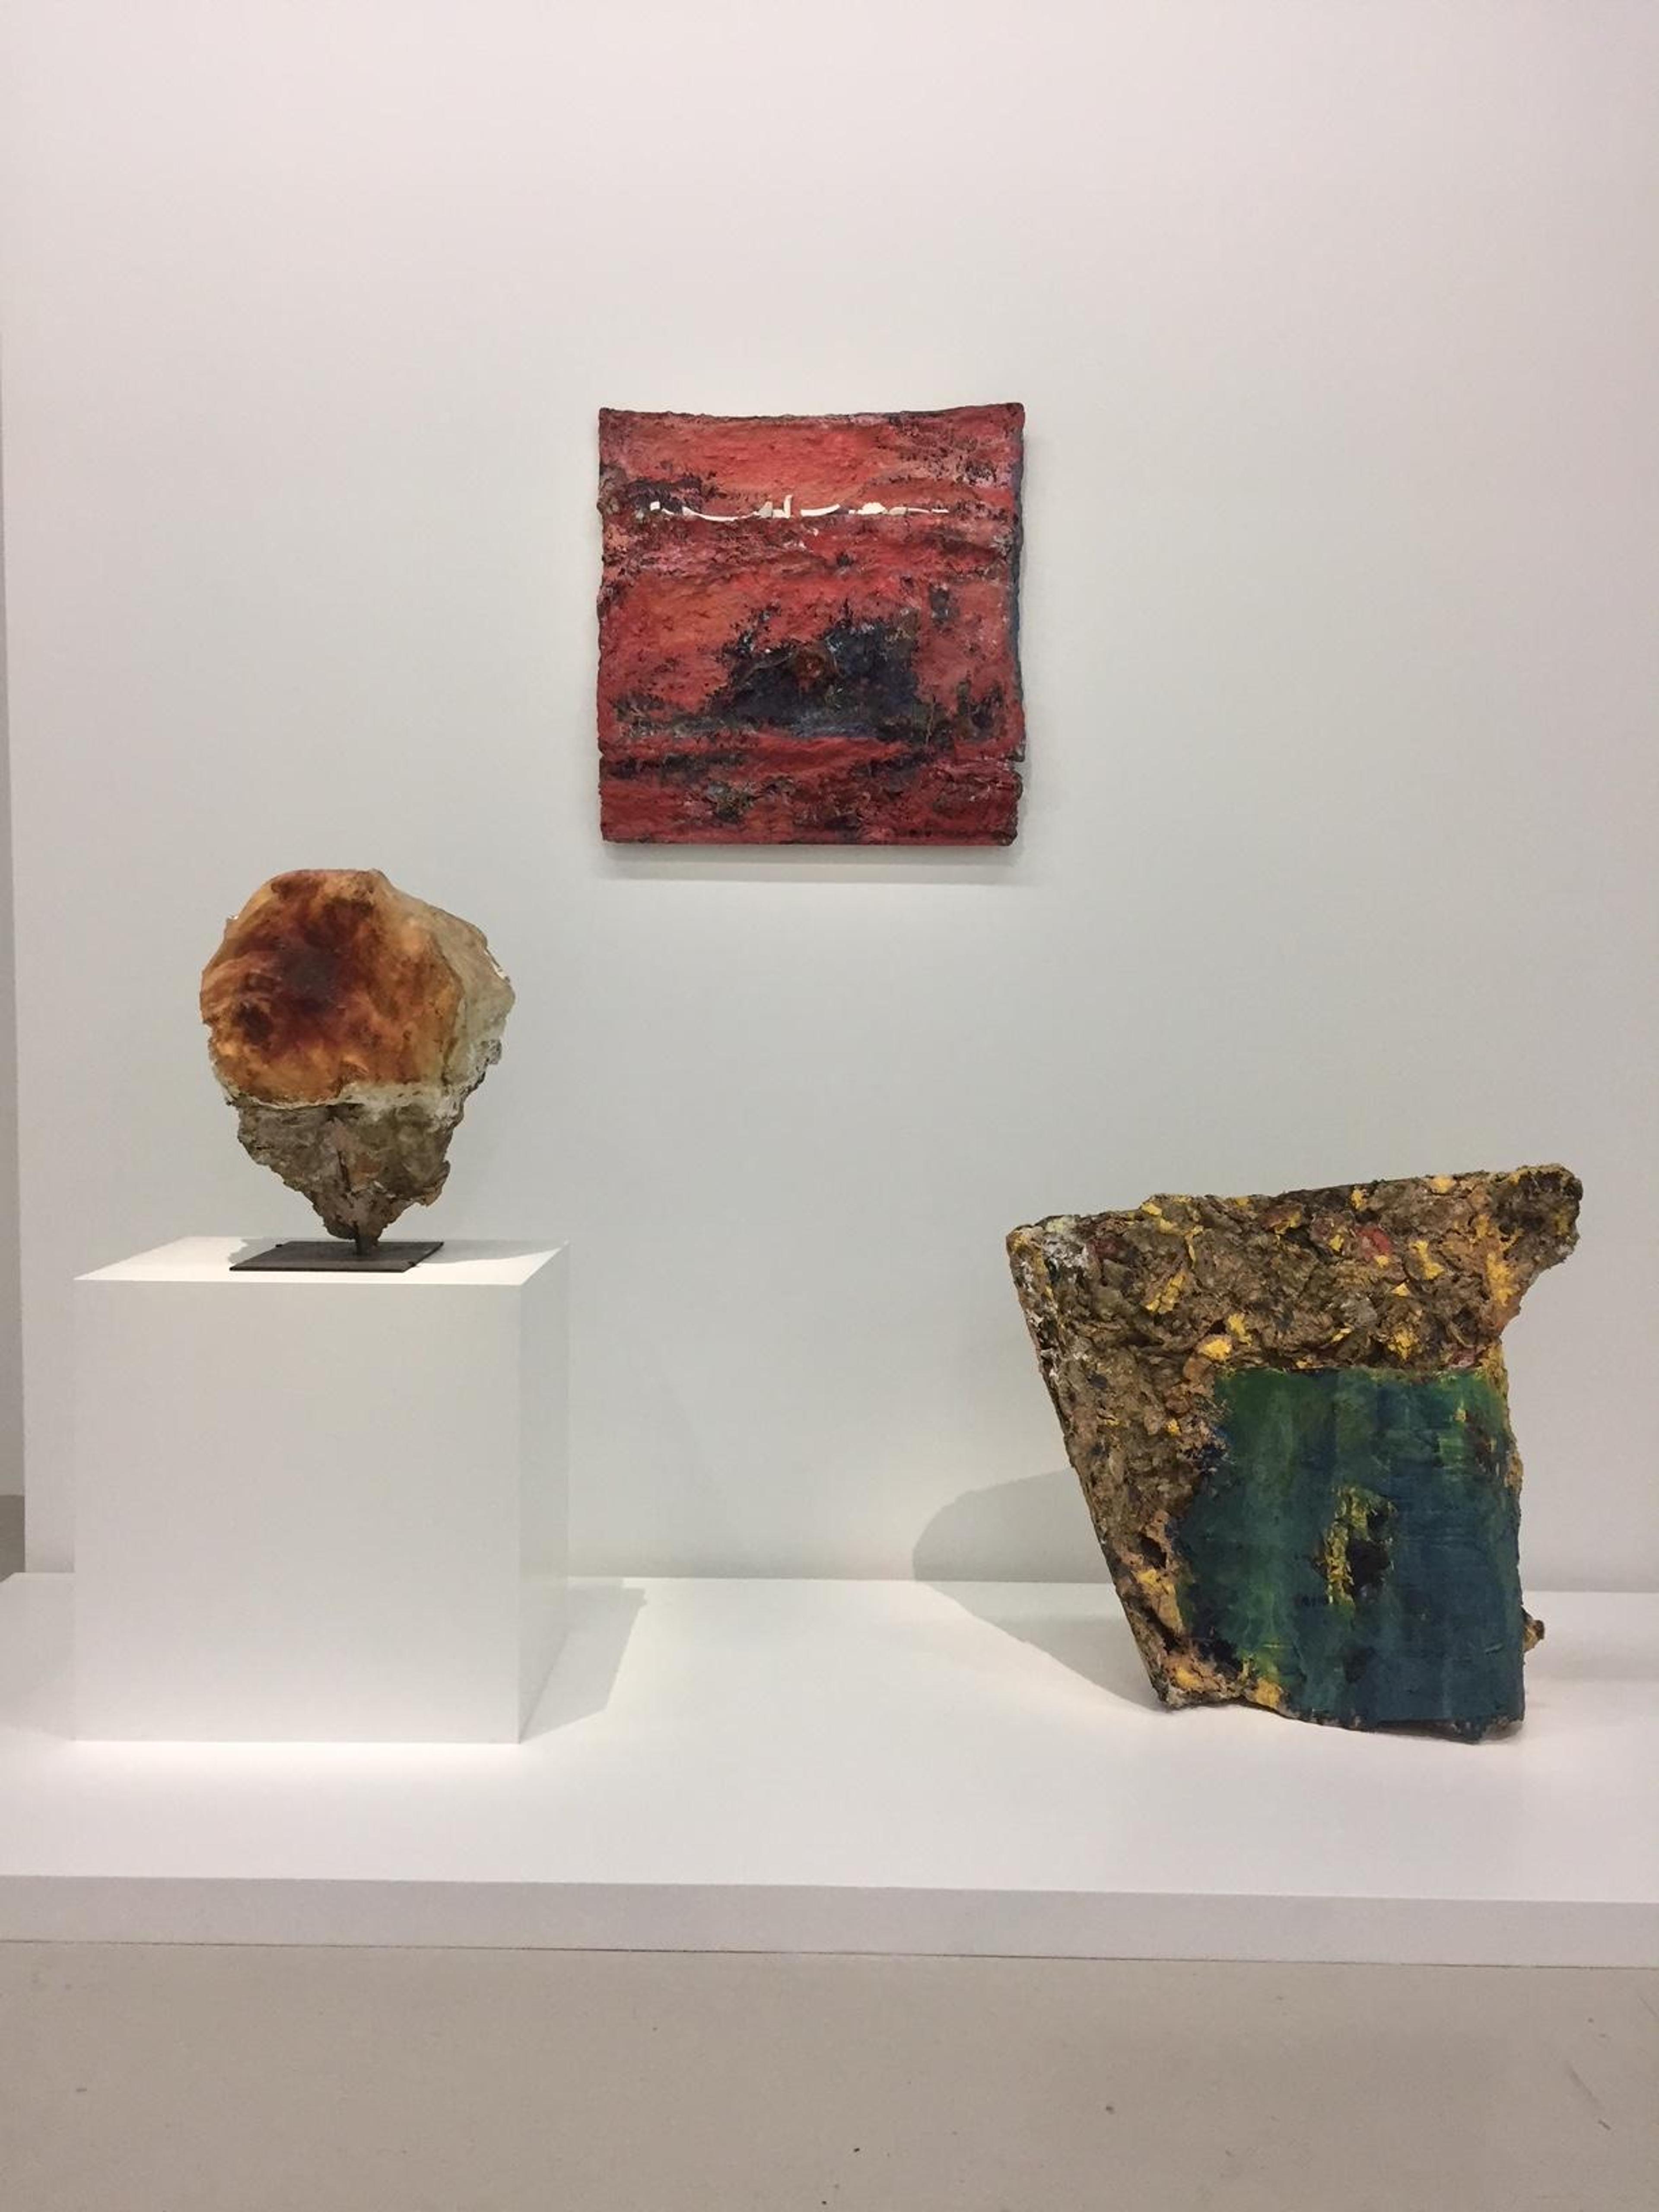 From left to right: collaborations with: Herbert Brandl, Albert Oehlen, and Herbert Brandl, titled  Ohne Titel  (1987),  Flatus vocis  (1991), Frucht ( Fruit, 1987), respectively.